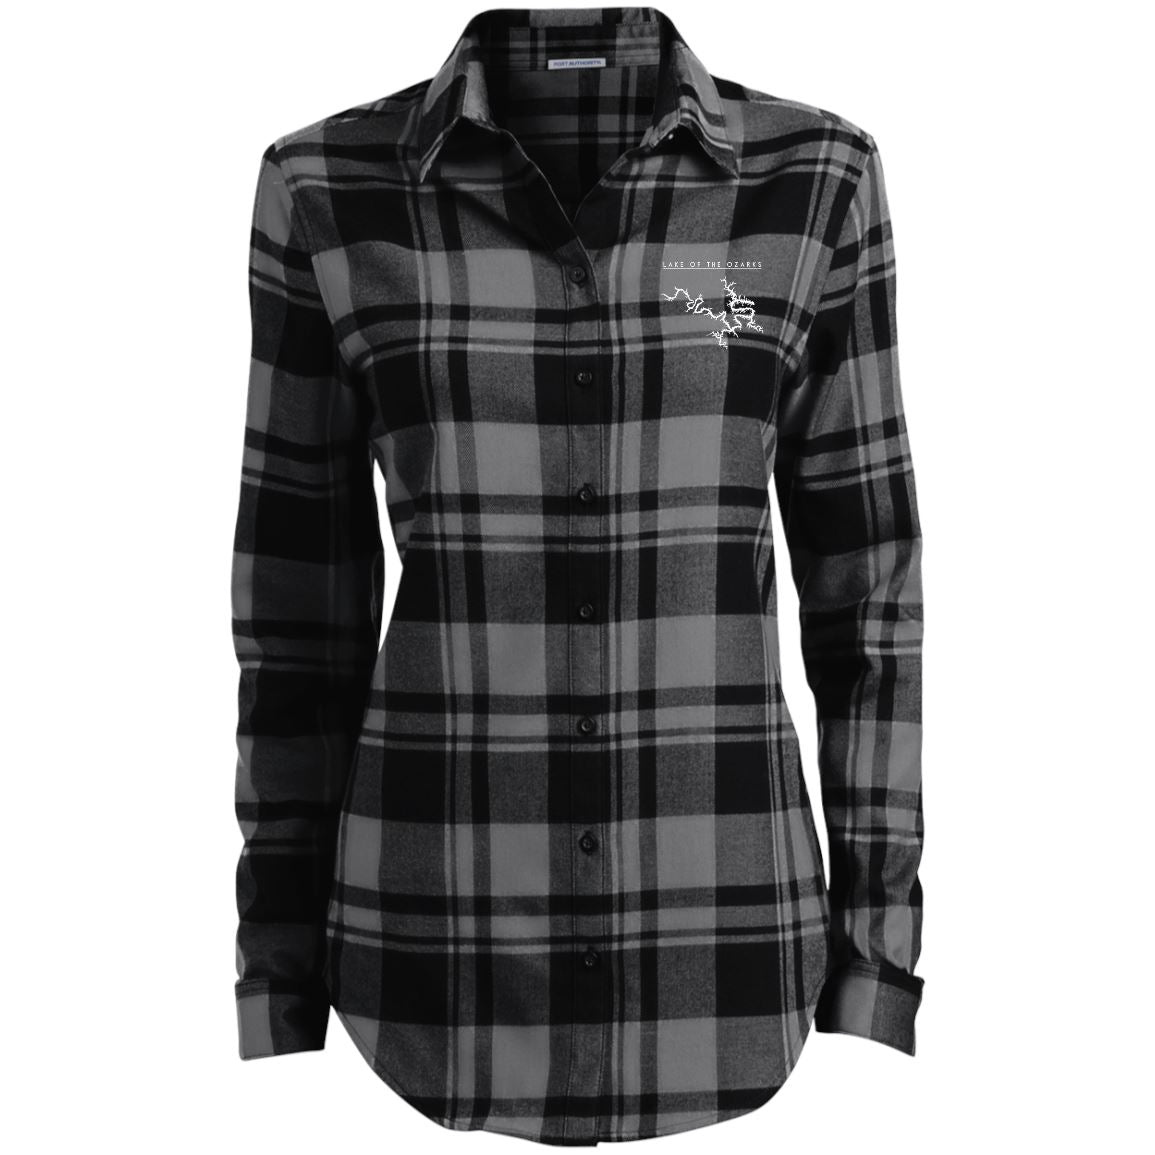 Lake Of The Ozarks Embroidered Ladies' Plaid Flannel Tunic - Houseboat Kings